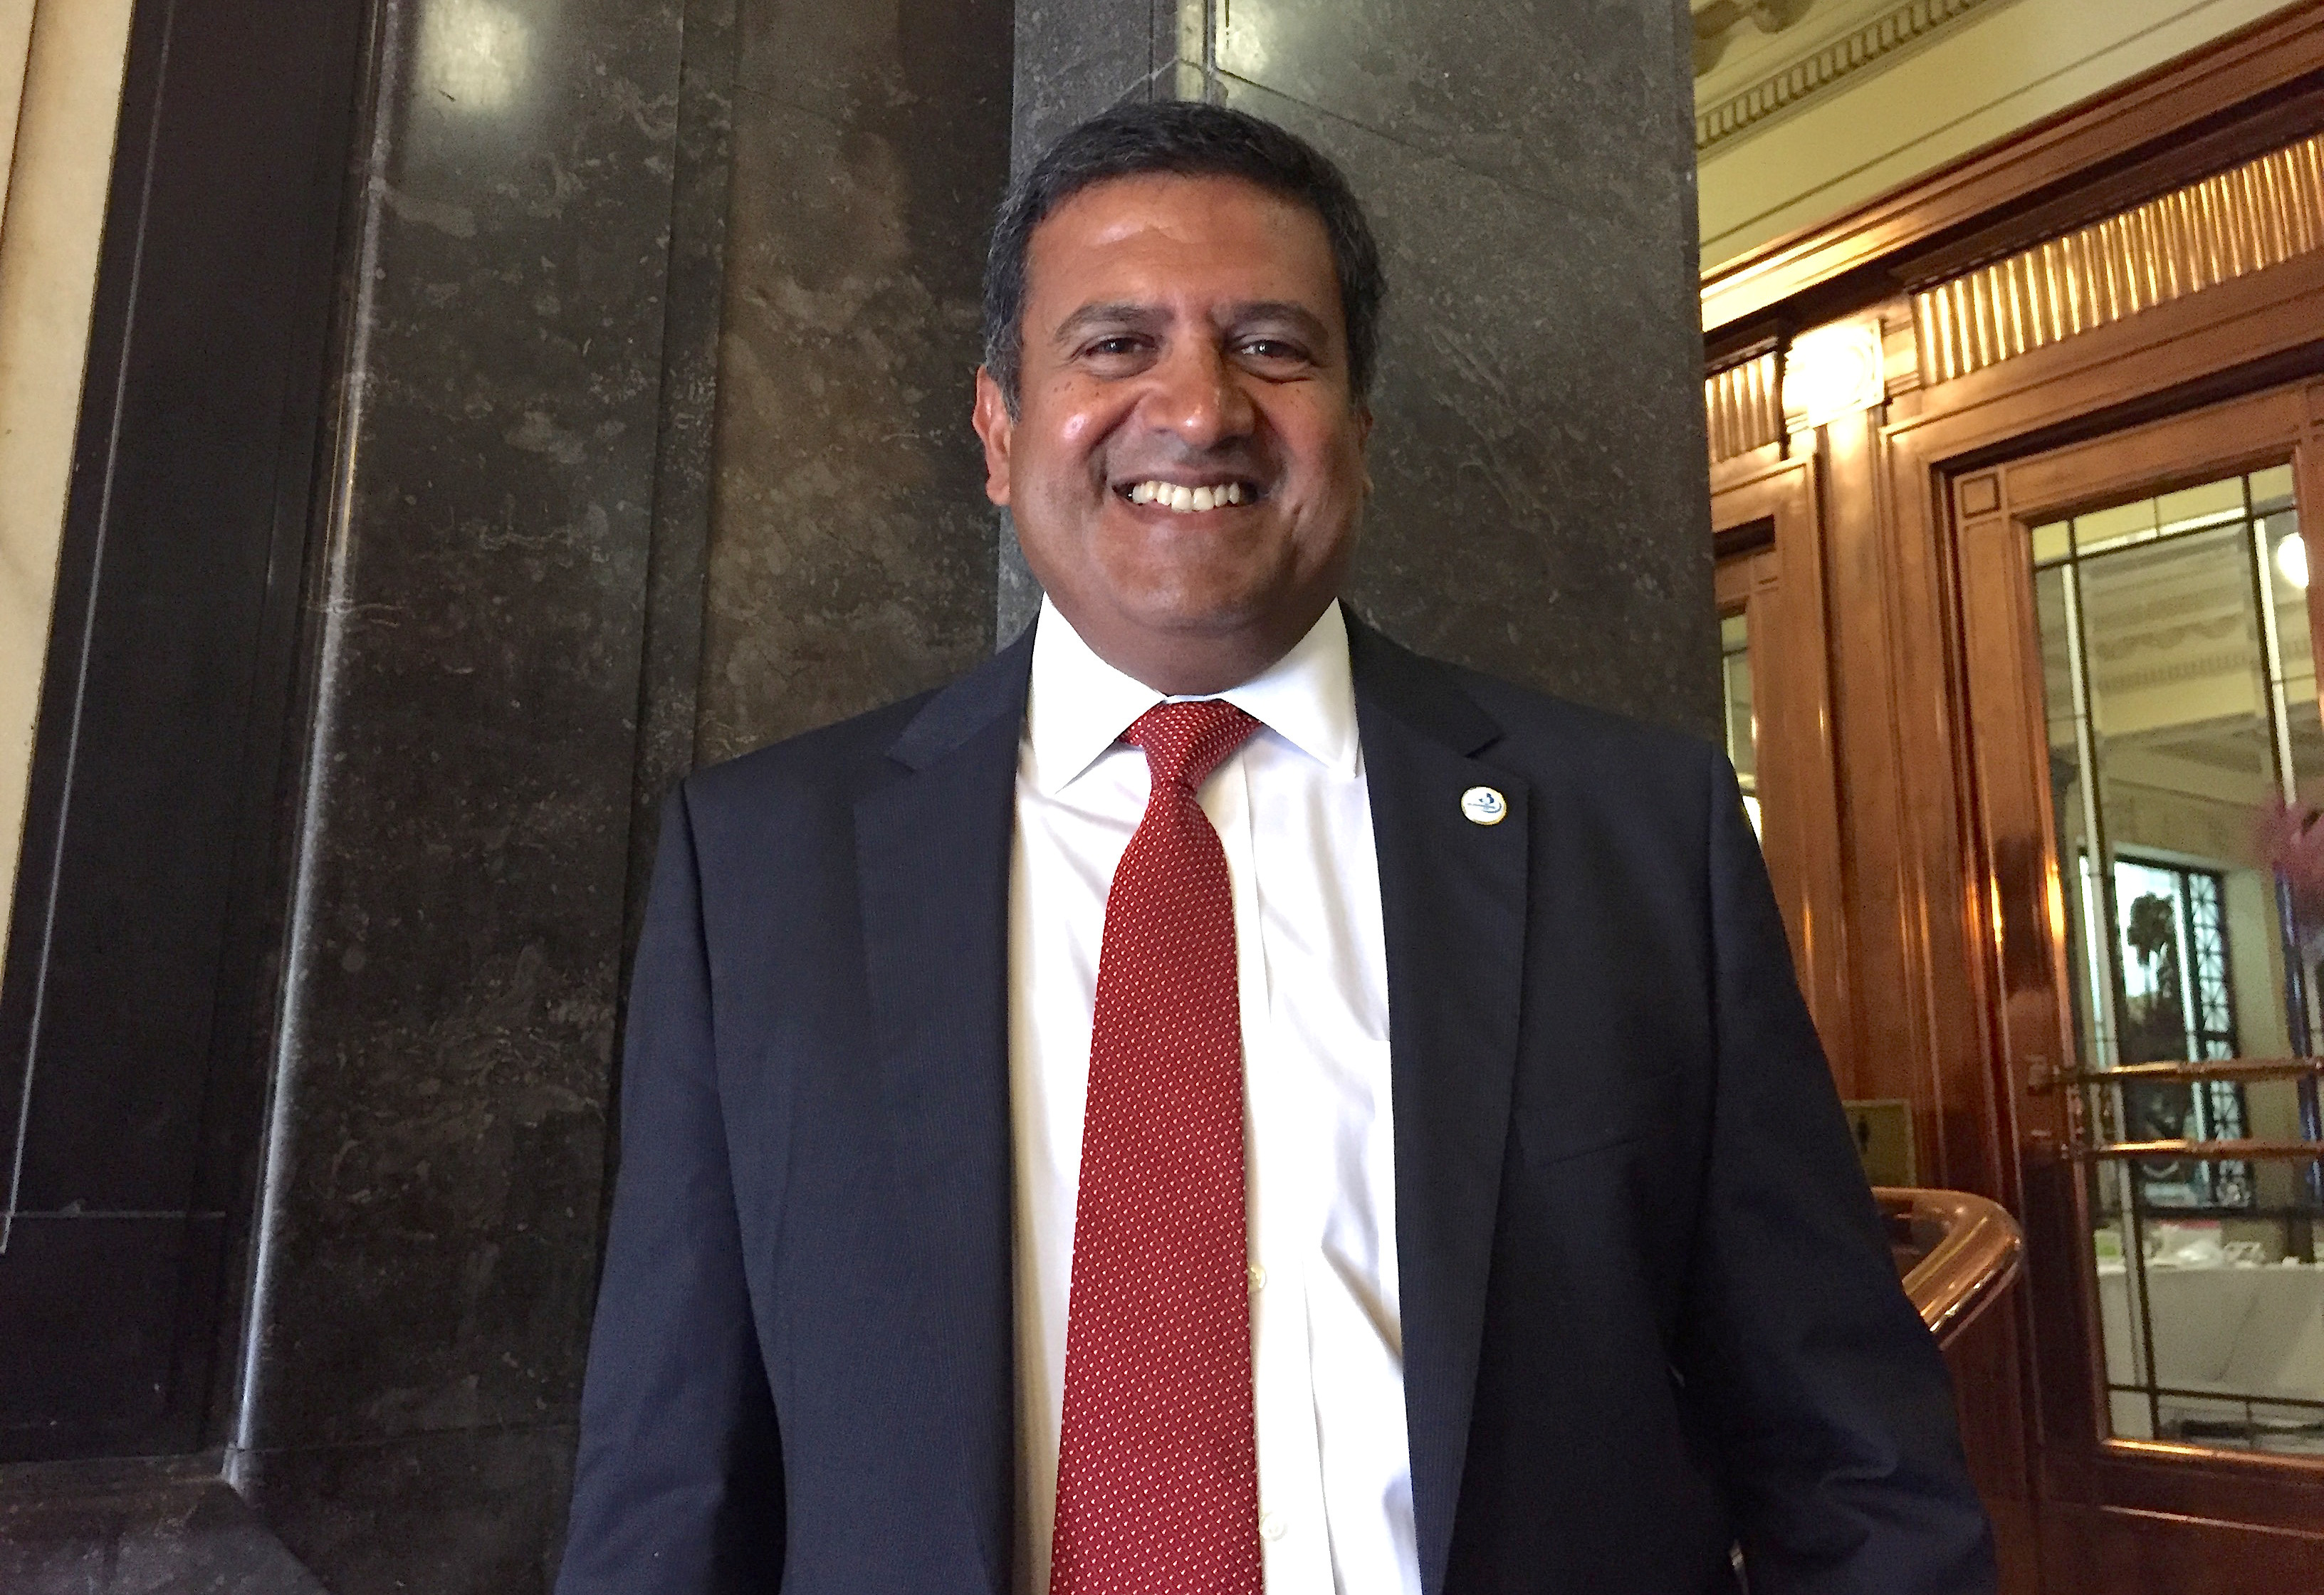 Sandeep Biswas, Chief Executive of Australia's biggest gold miner Newcrest Mining Ltd, poses for a photograph after speaking at the Melbourne Mining Club in Melbourne, Australia